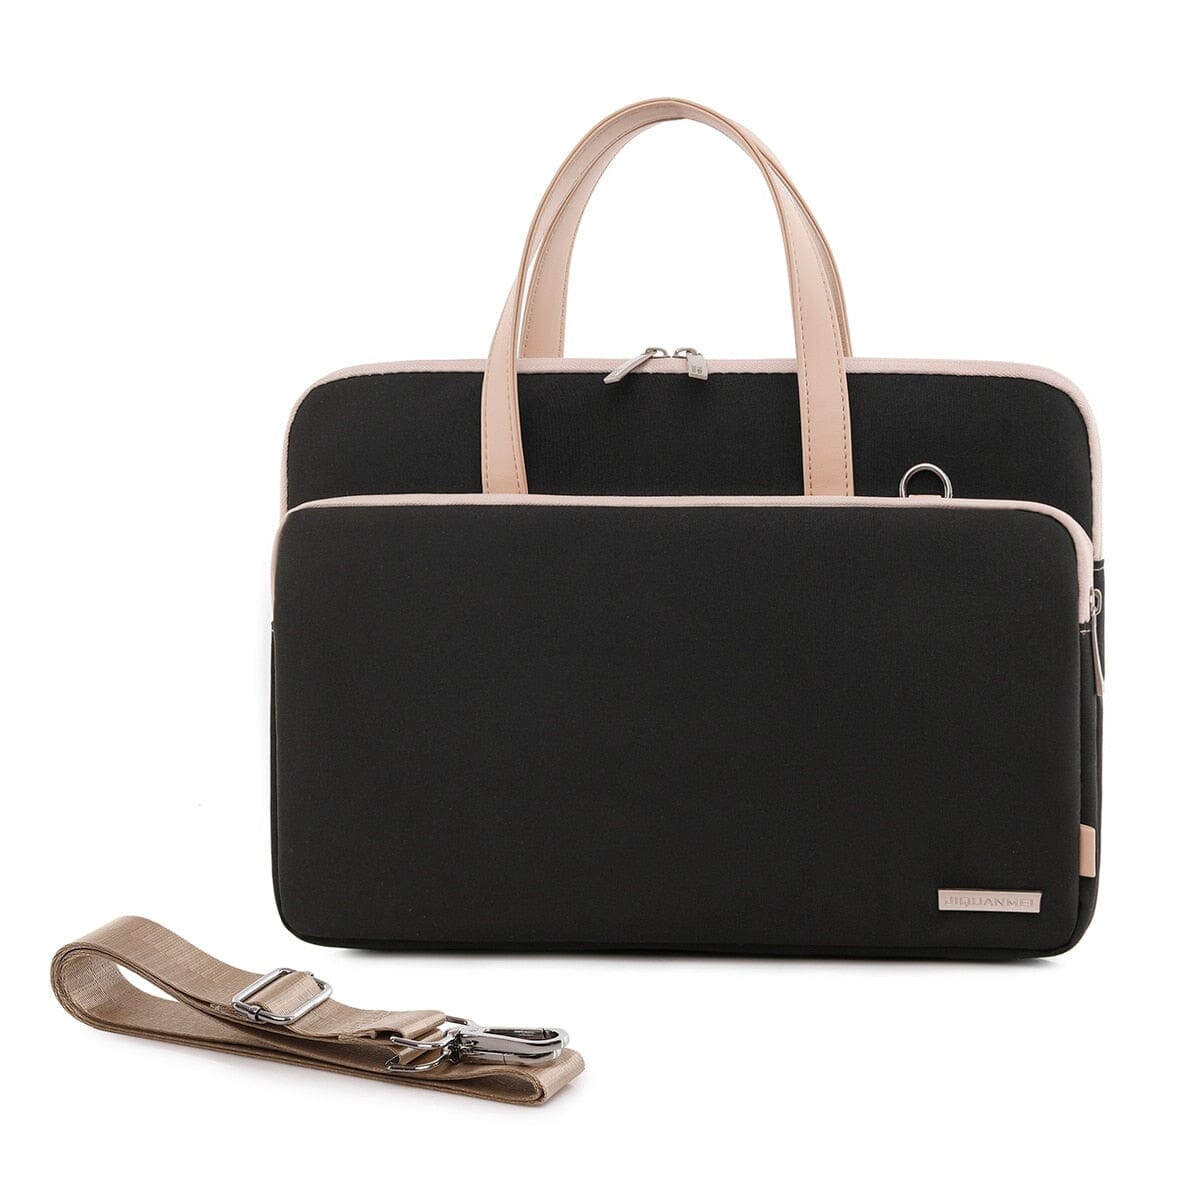 15 Inch Laptop Handbag The Store Bags Black For 15.6-16 inch 